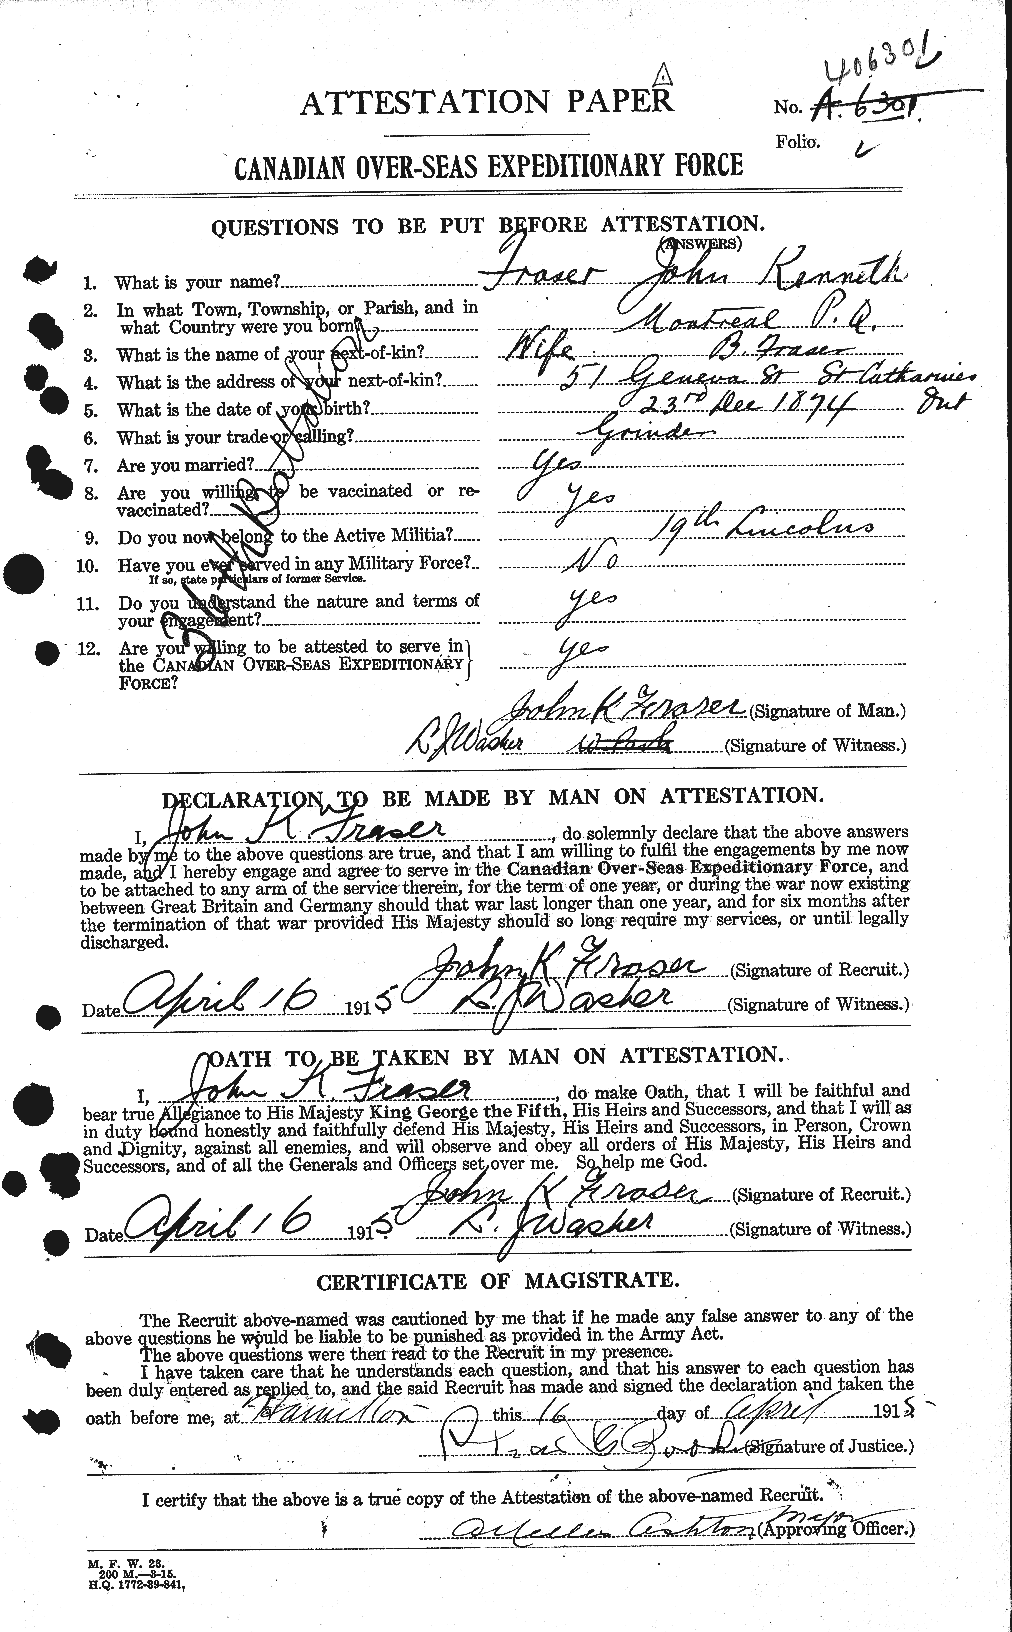 Personnel Records of the First World War - CEF 334146a